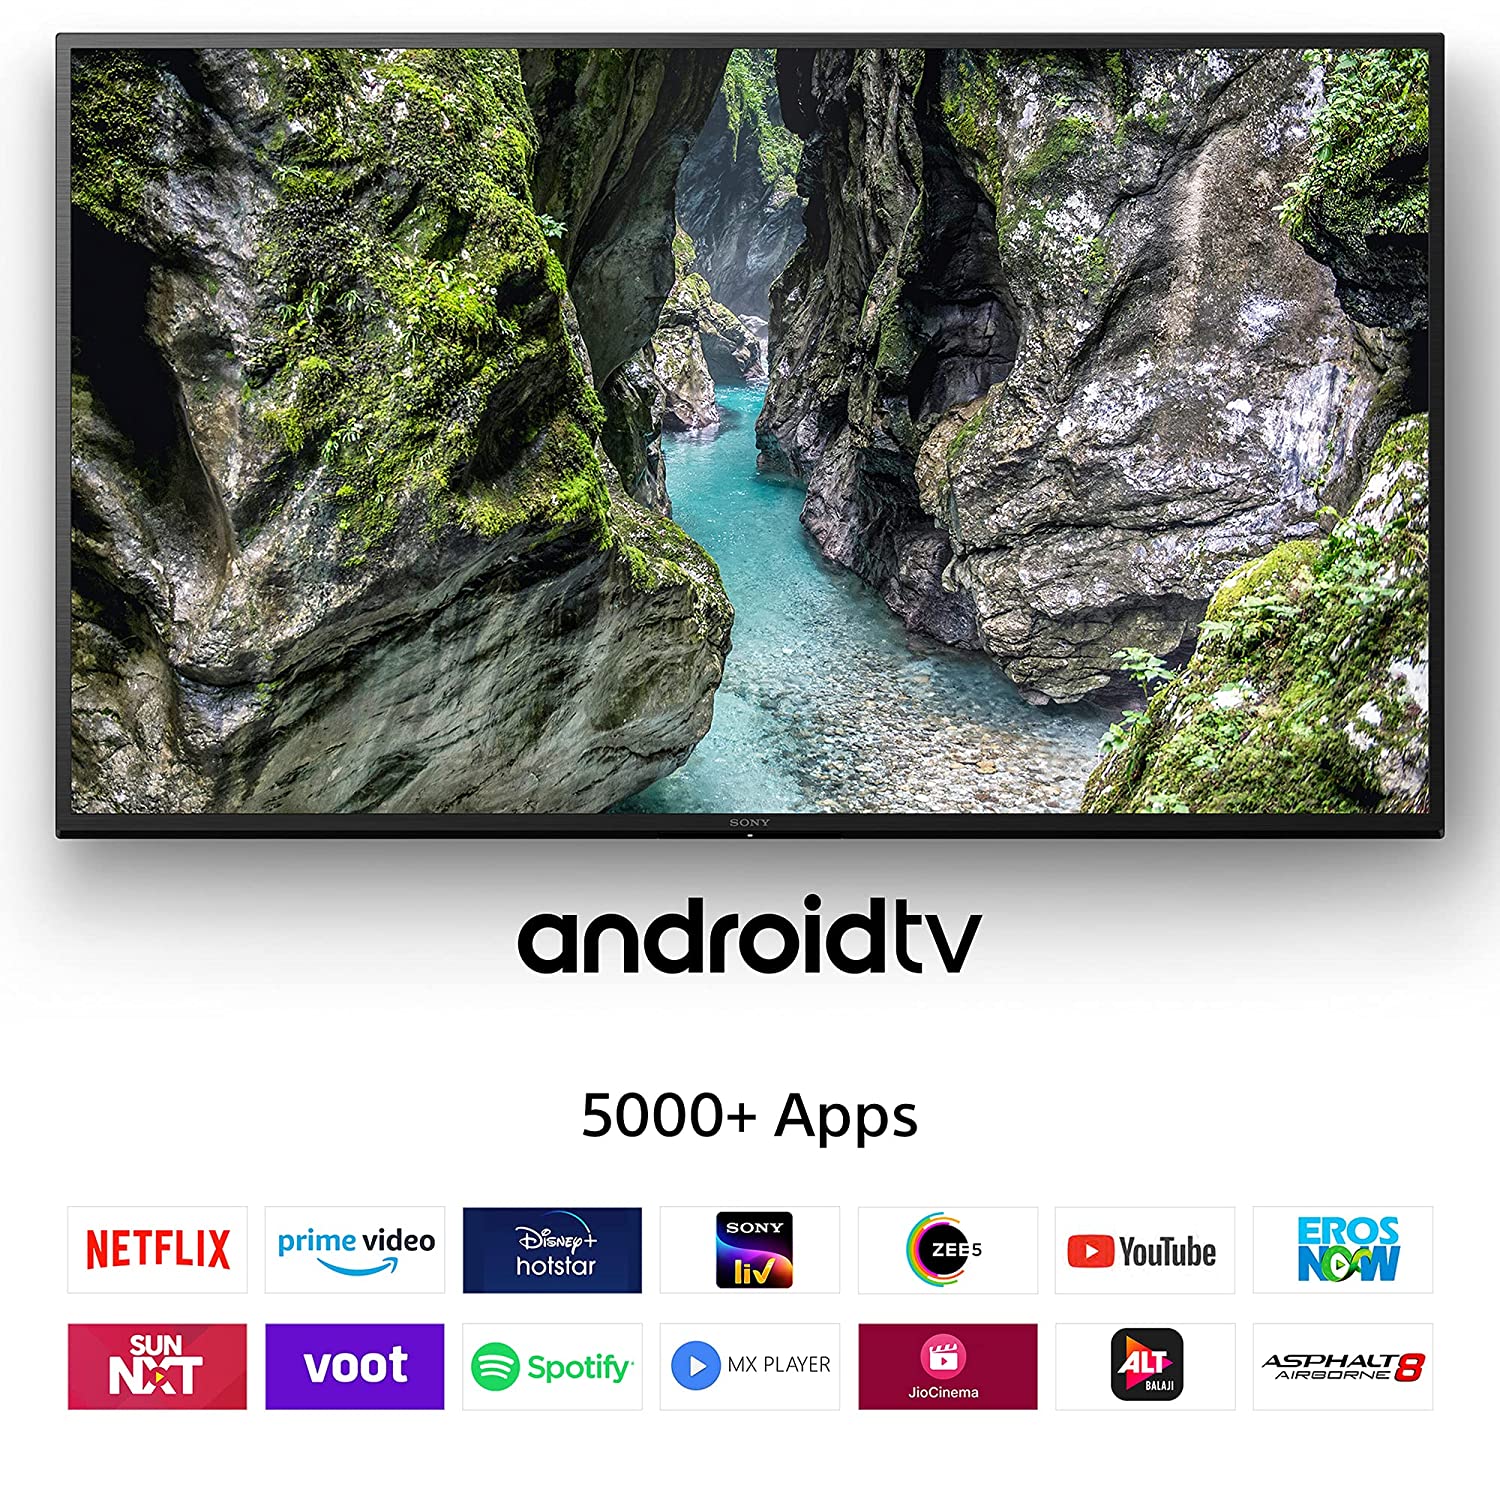 Sony Bravia 108 cm (43 inches) 4K Ultra HD Smart Android LED TV KD-43X75 (Black) (2021 Model) with A